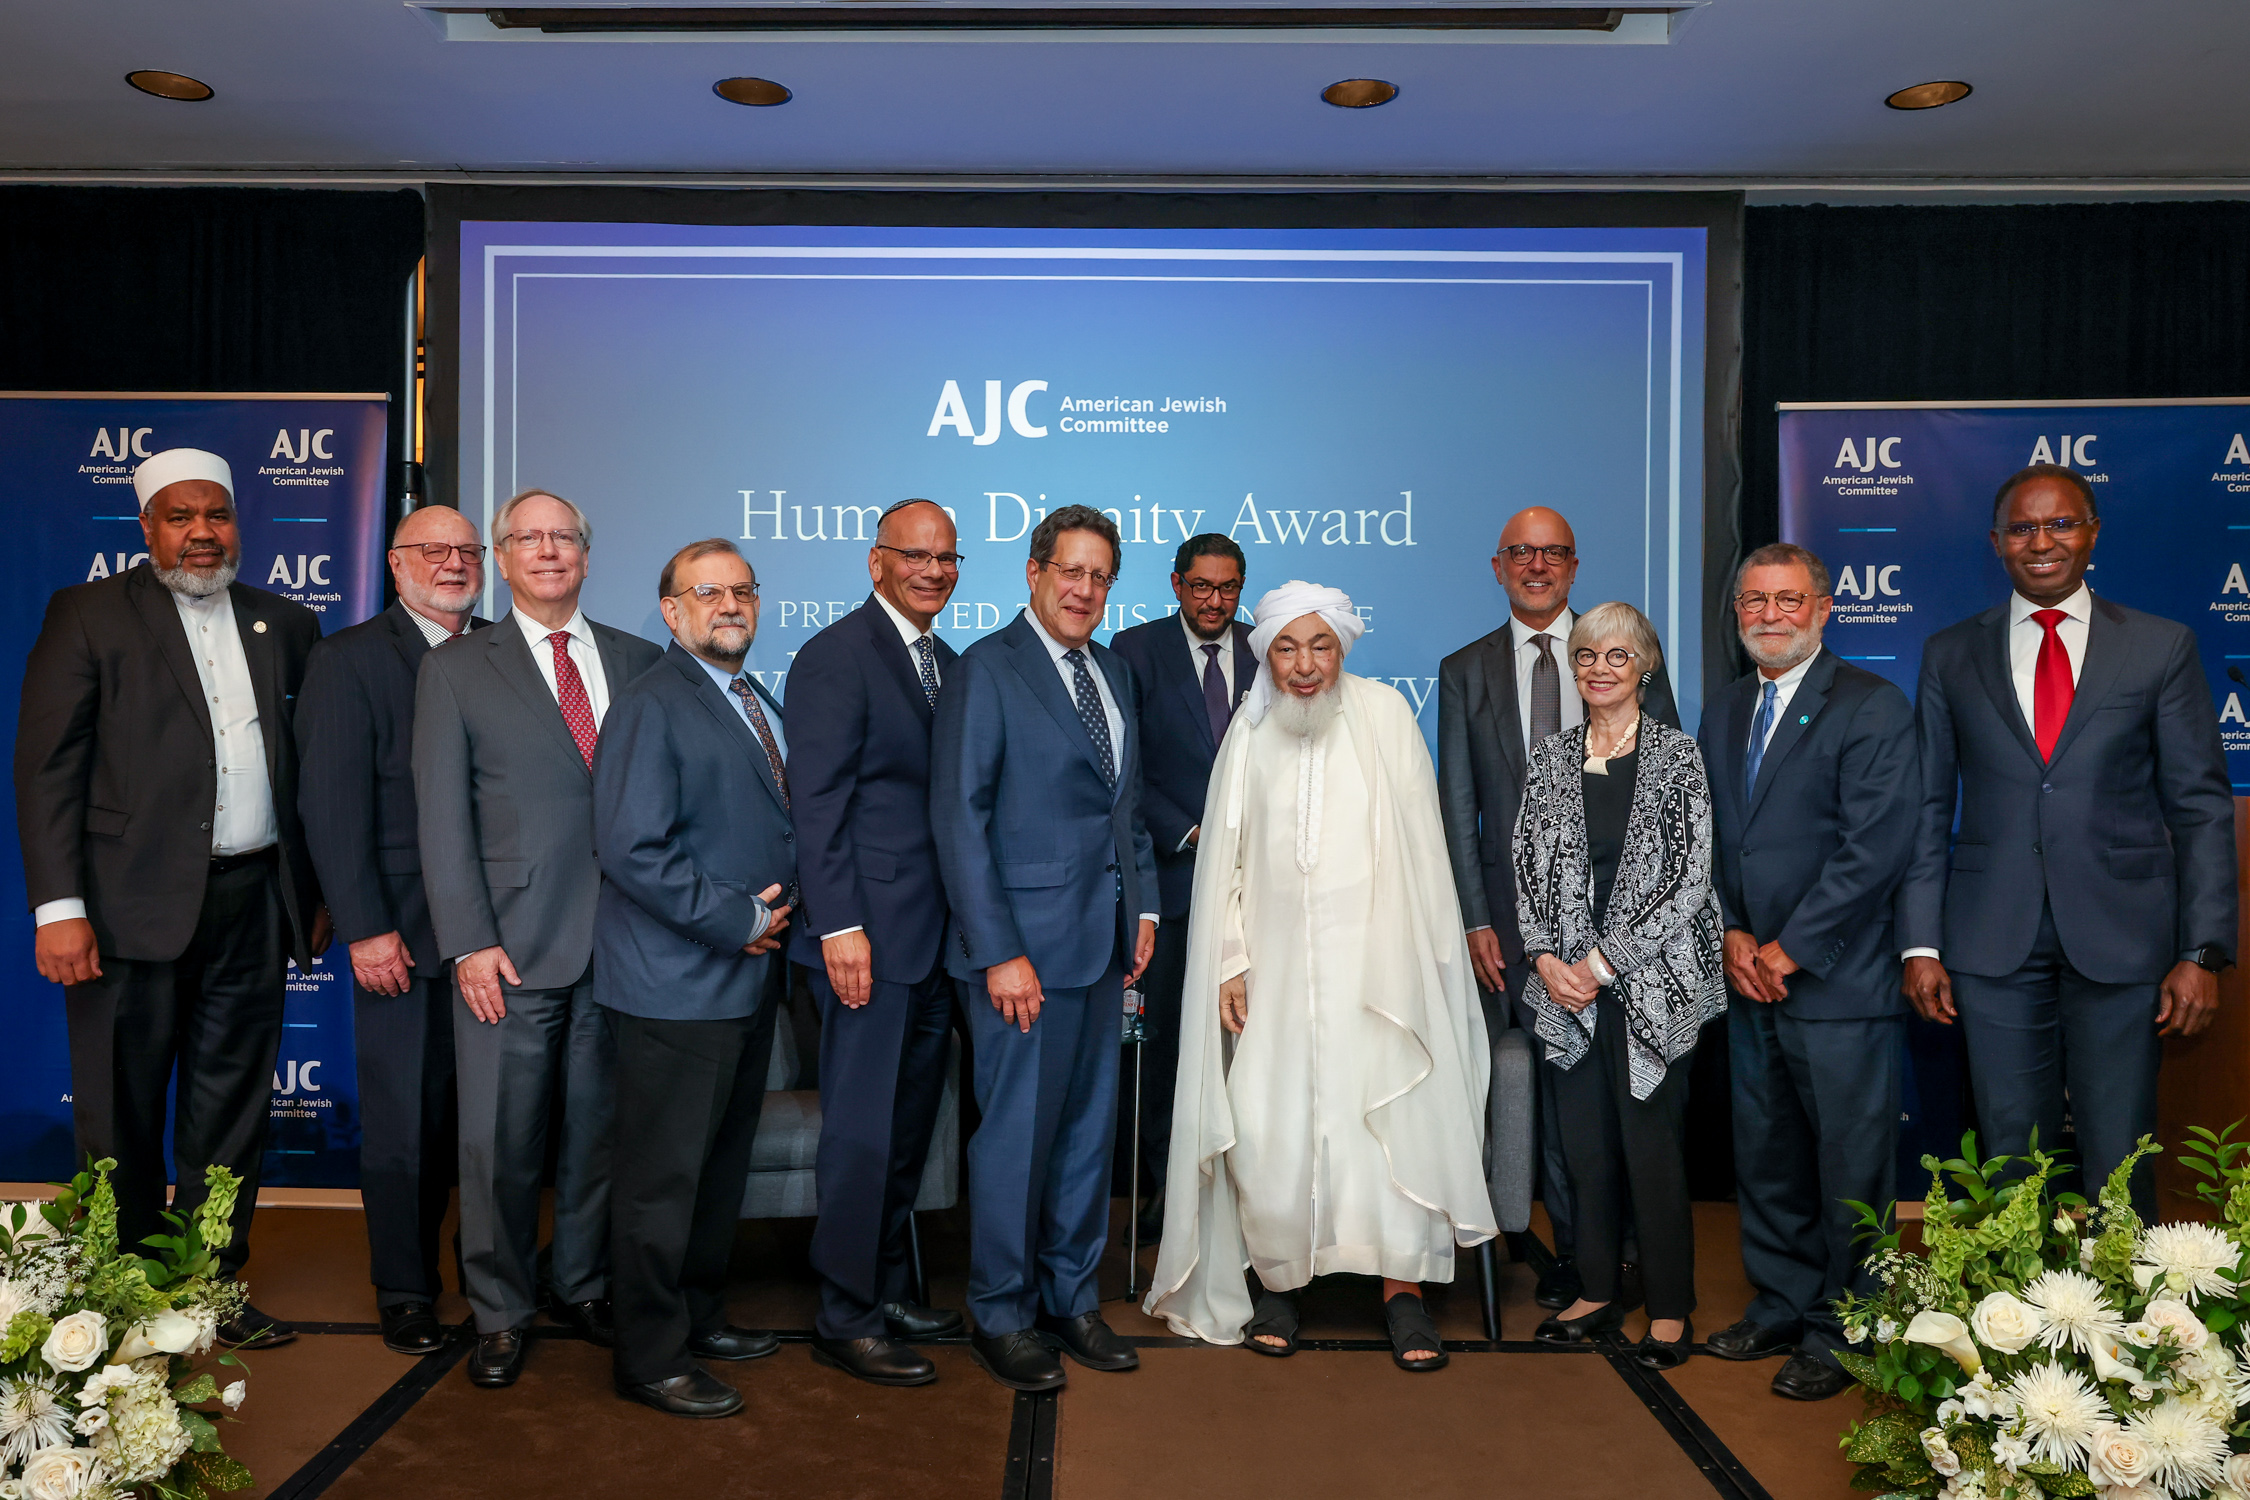 Muslim clerics and leaders and AJC leadership joined Shaykh Bin Bayyah in a ceremony at the Westin Grand Central in New York.